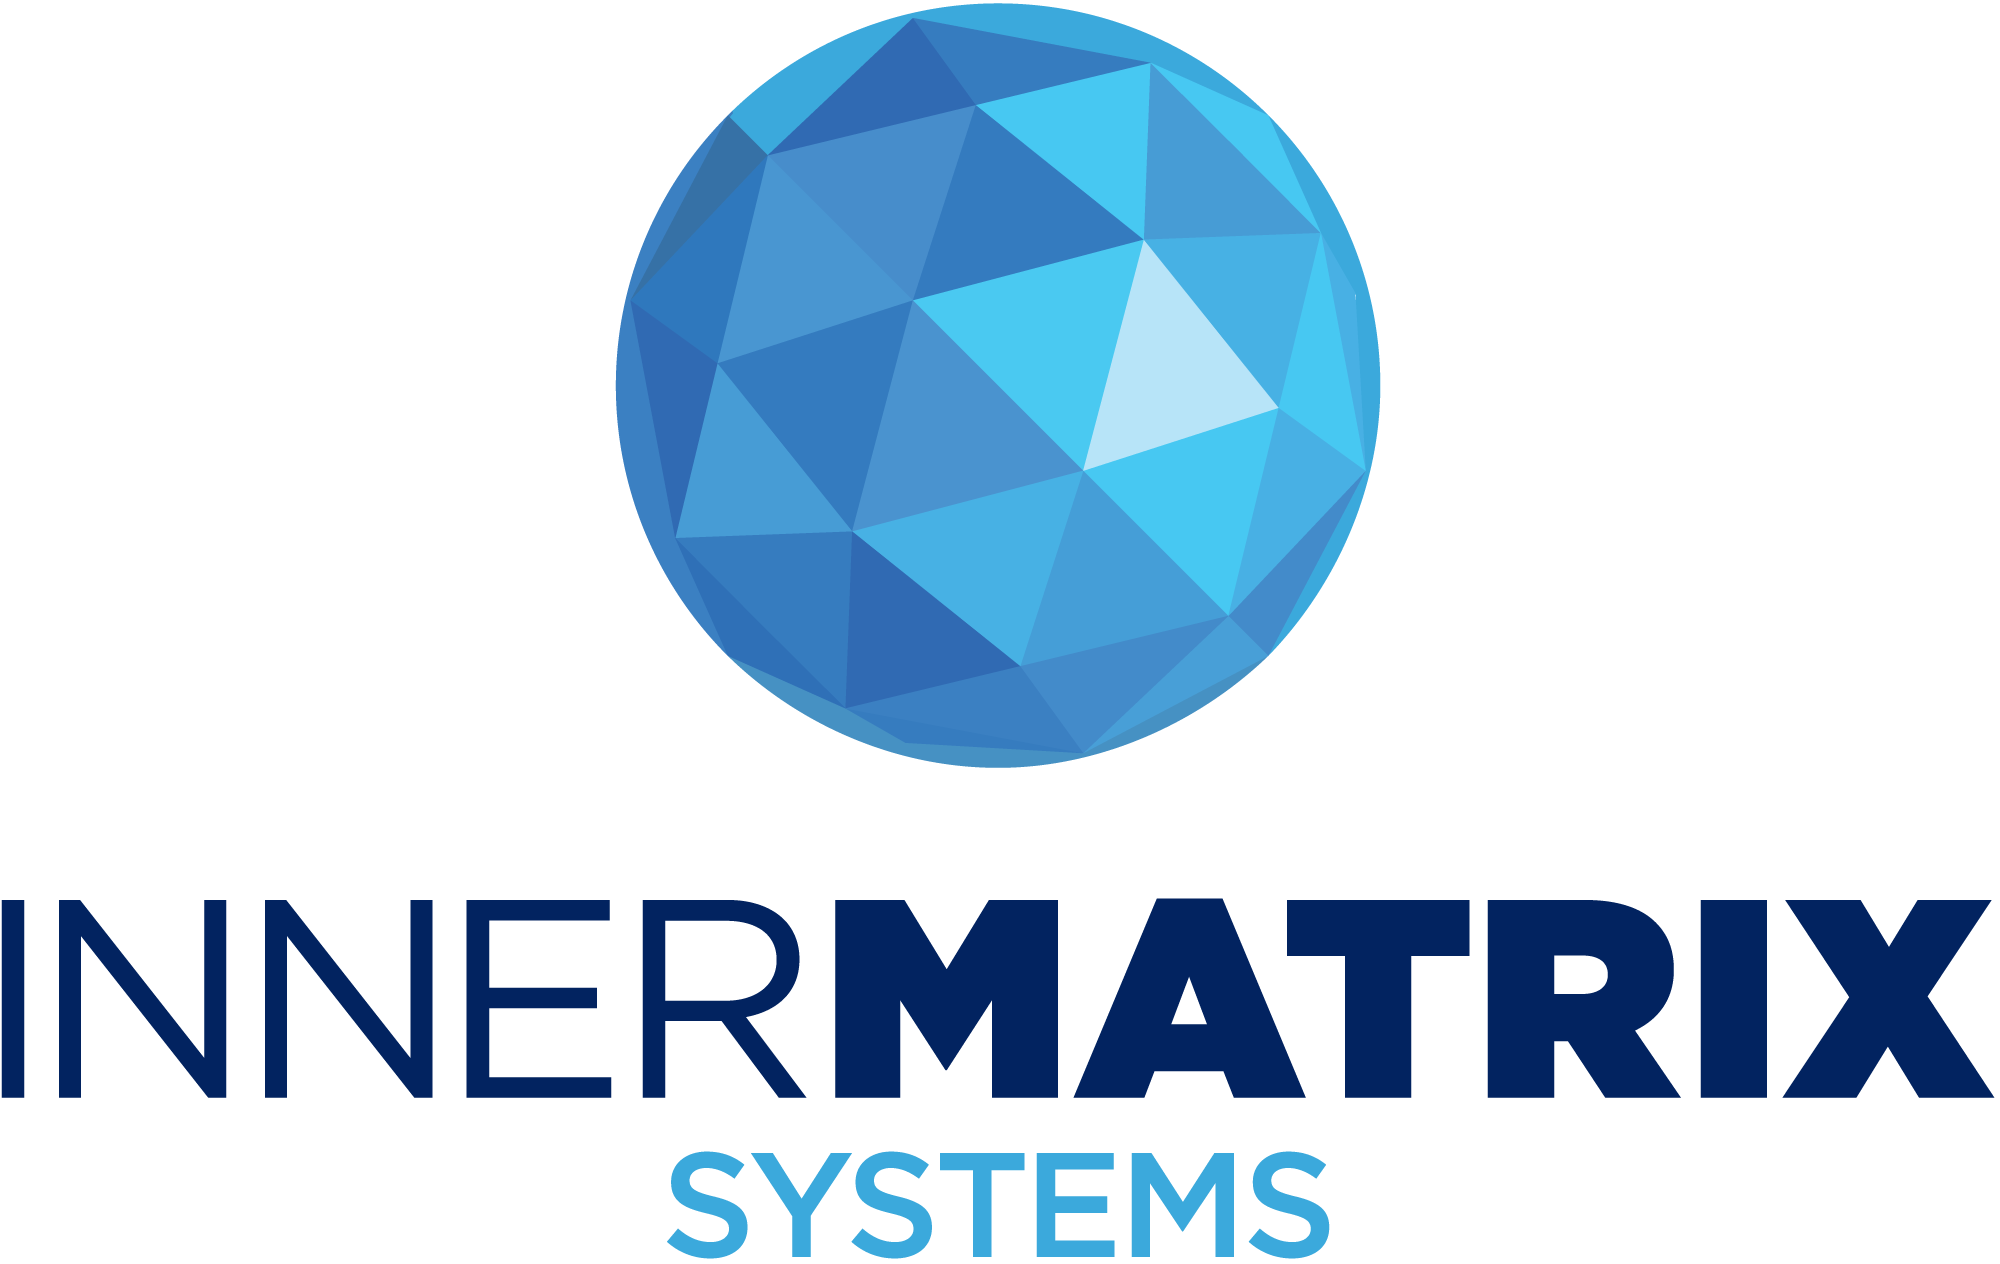 Automating Core Business Functionality at Inner Matrix Systems